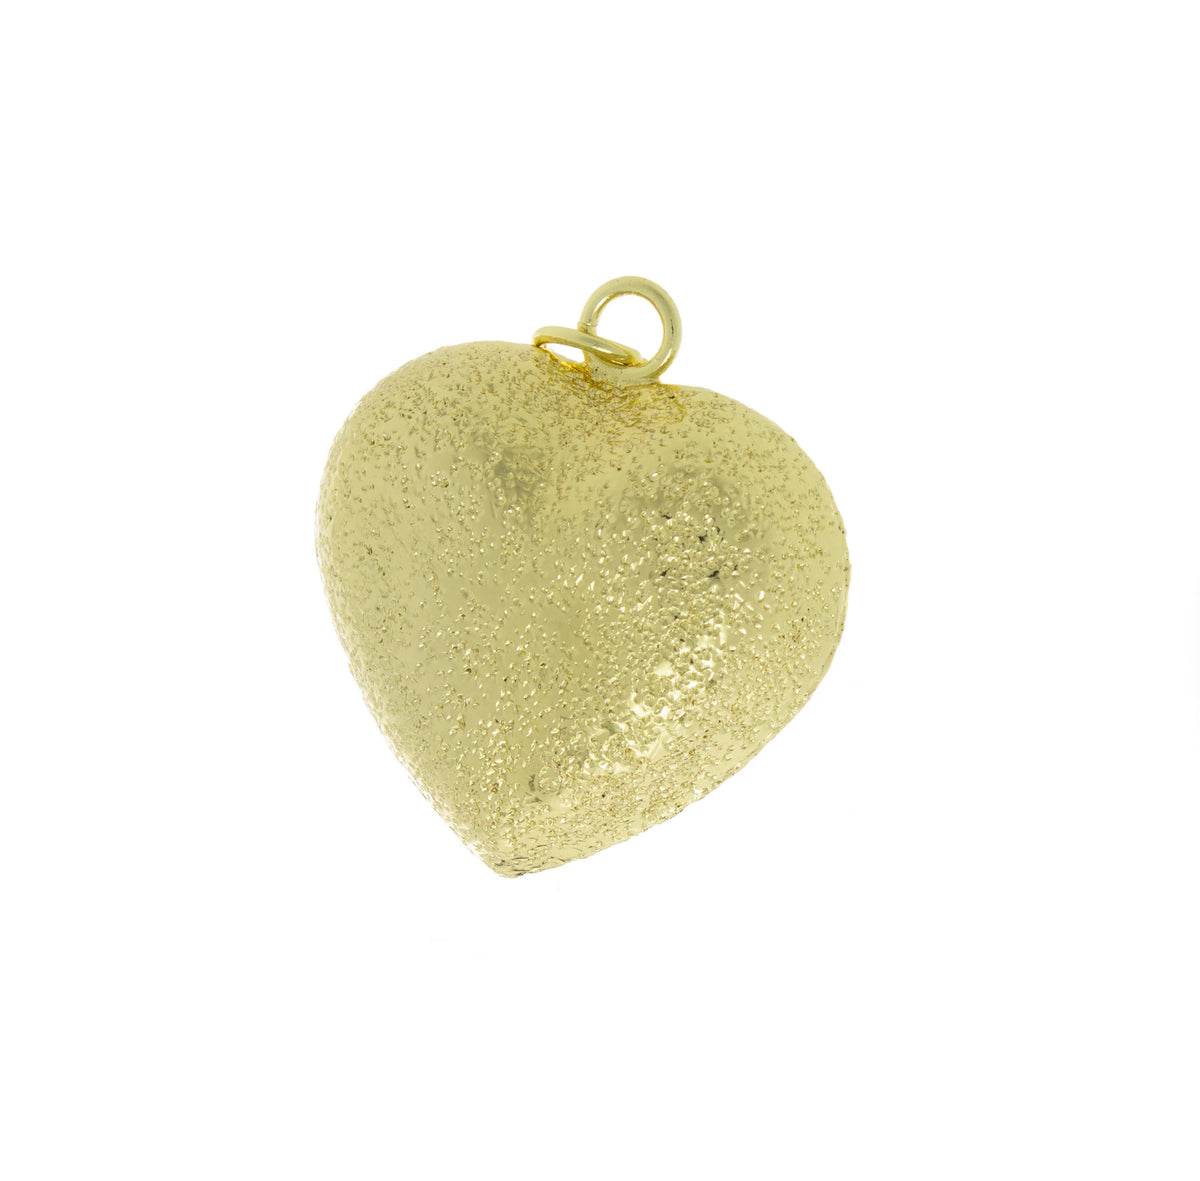 Puff Heart Hammered Gold Pendant,Balloon Heart Charm,Large Hammered Puffed Heart Charm, 1 pc,5 pcs Or 10pcs, WHOLESALE,CPG552